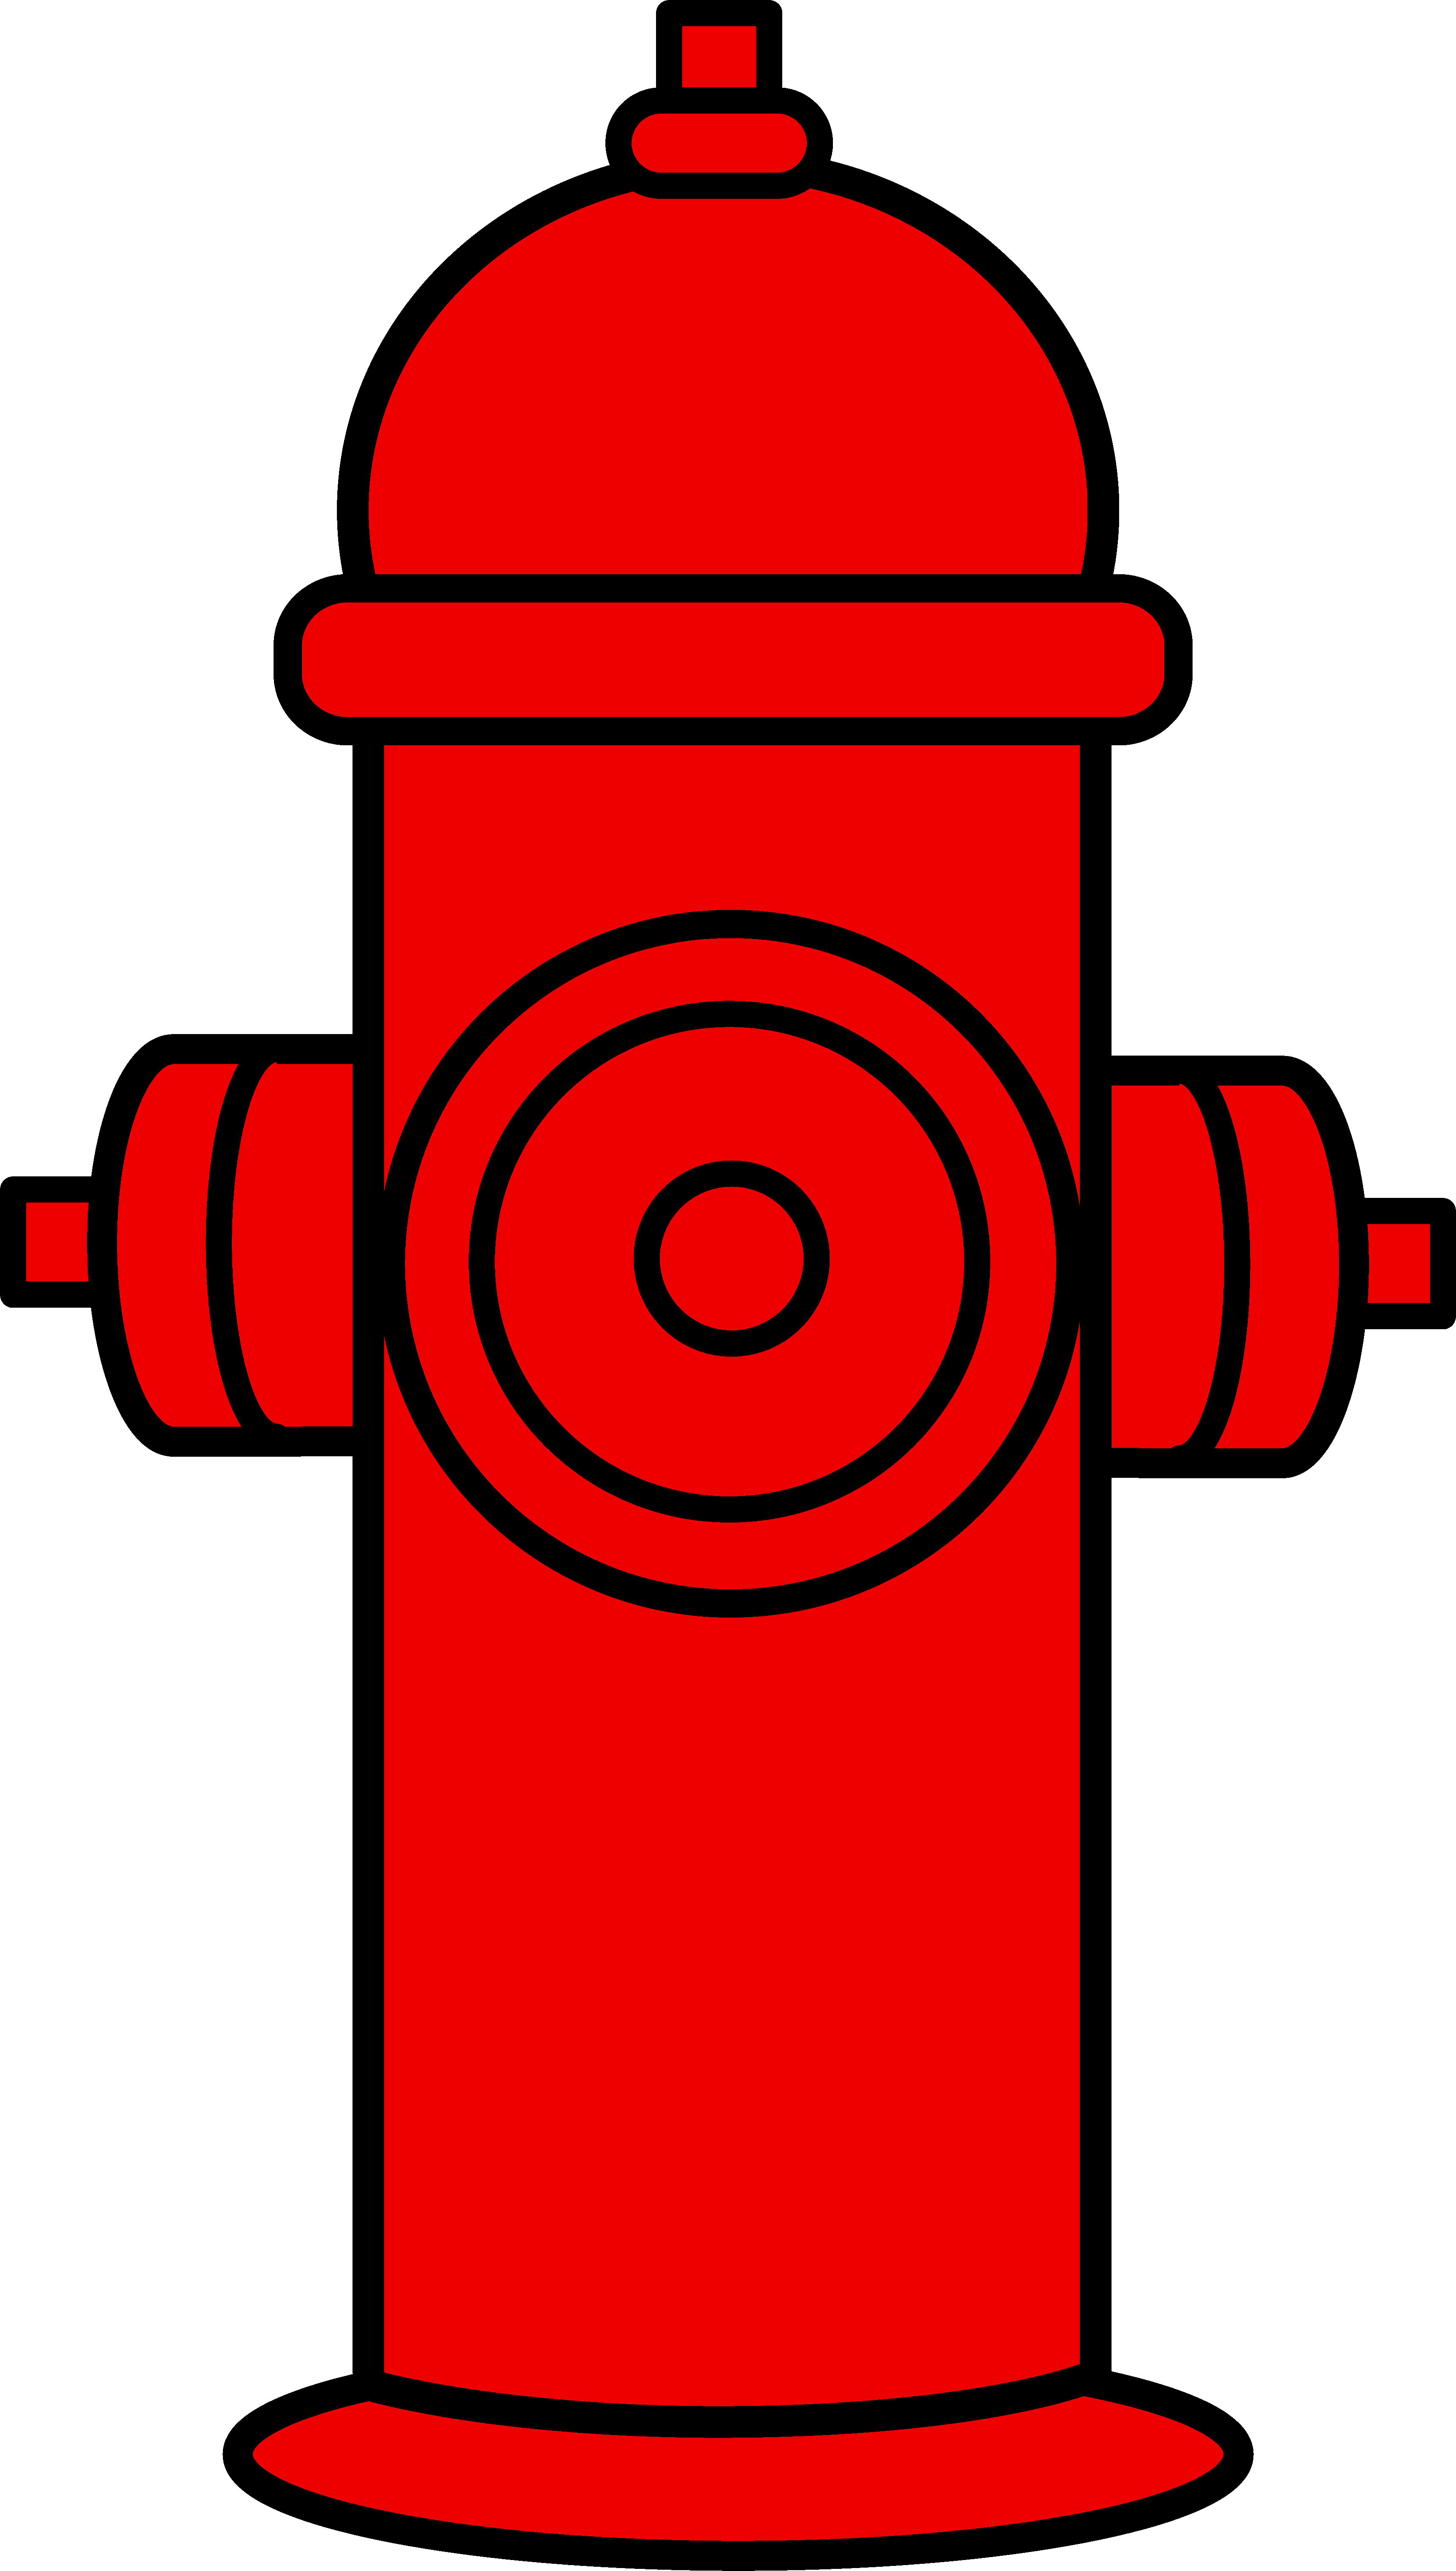 fire inspection clipart - photo #31